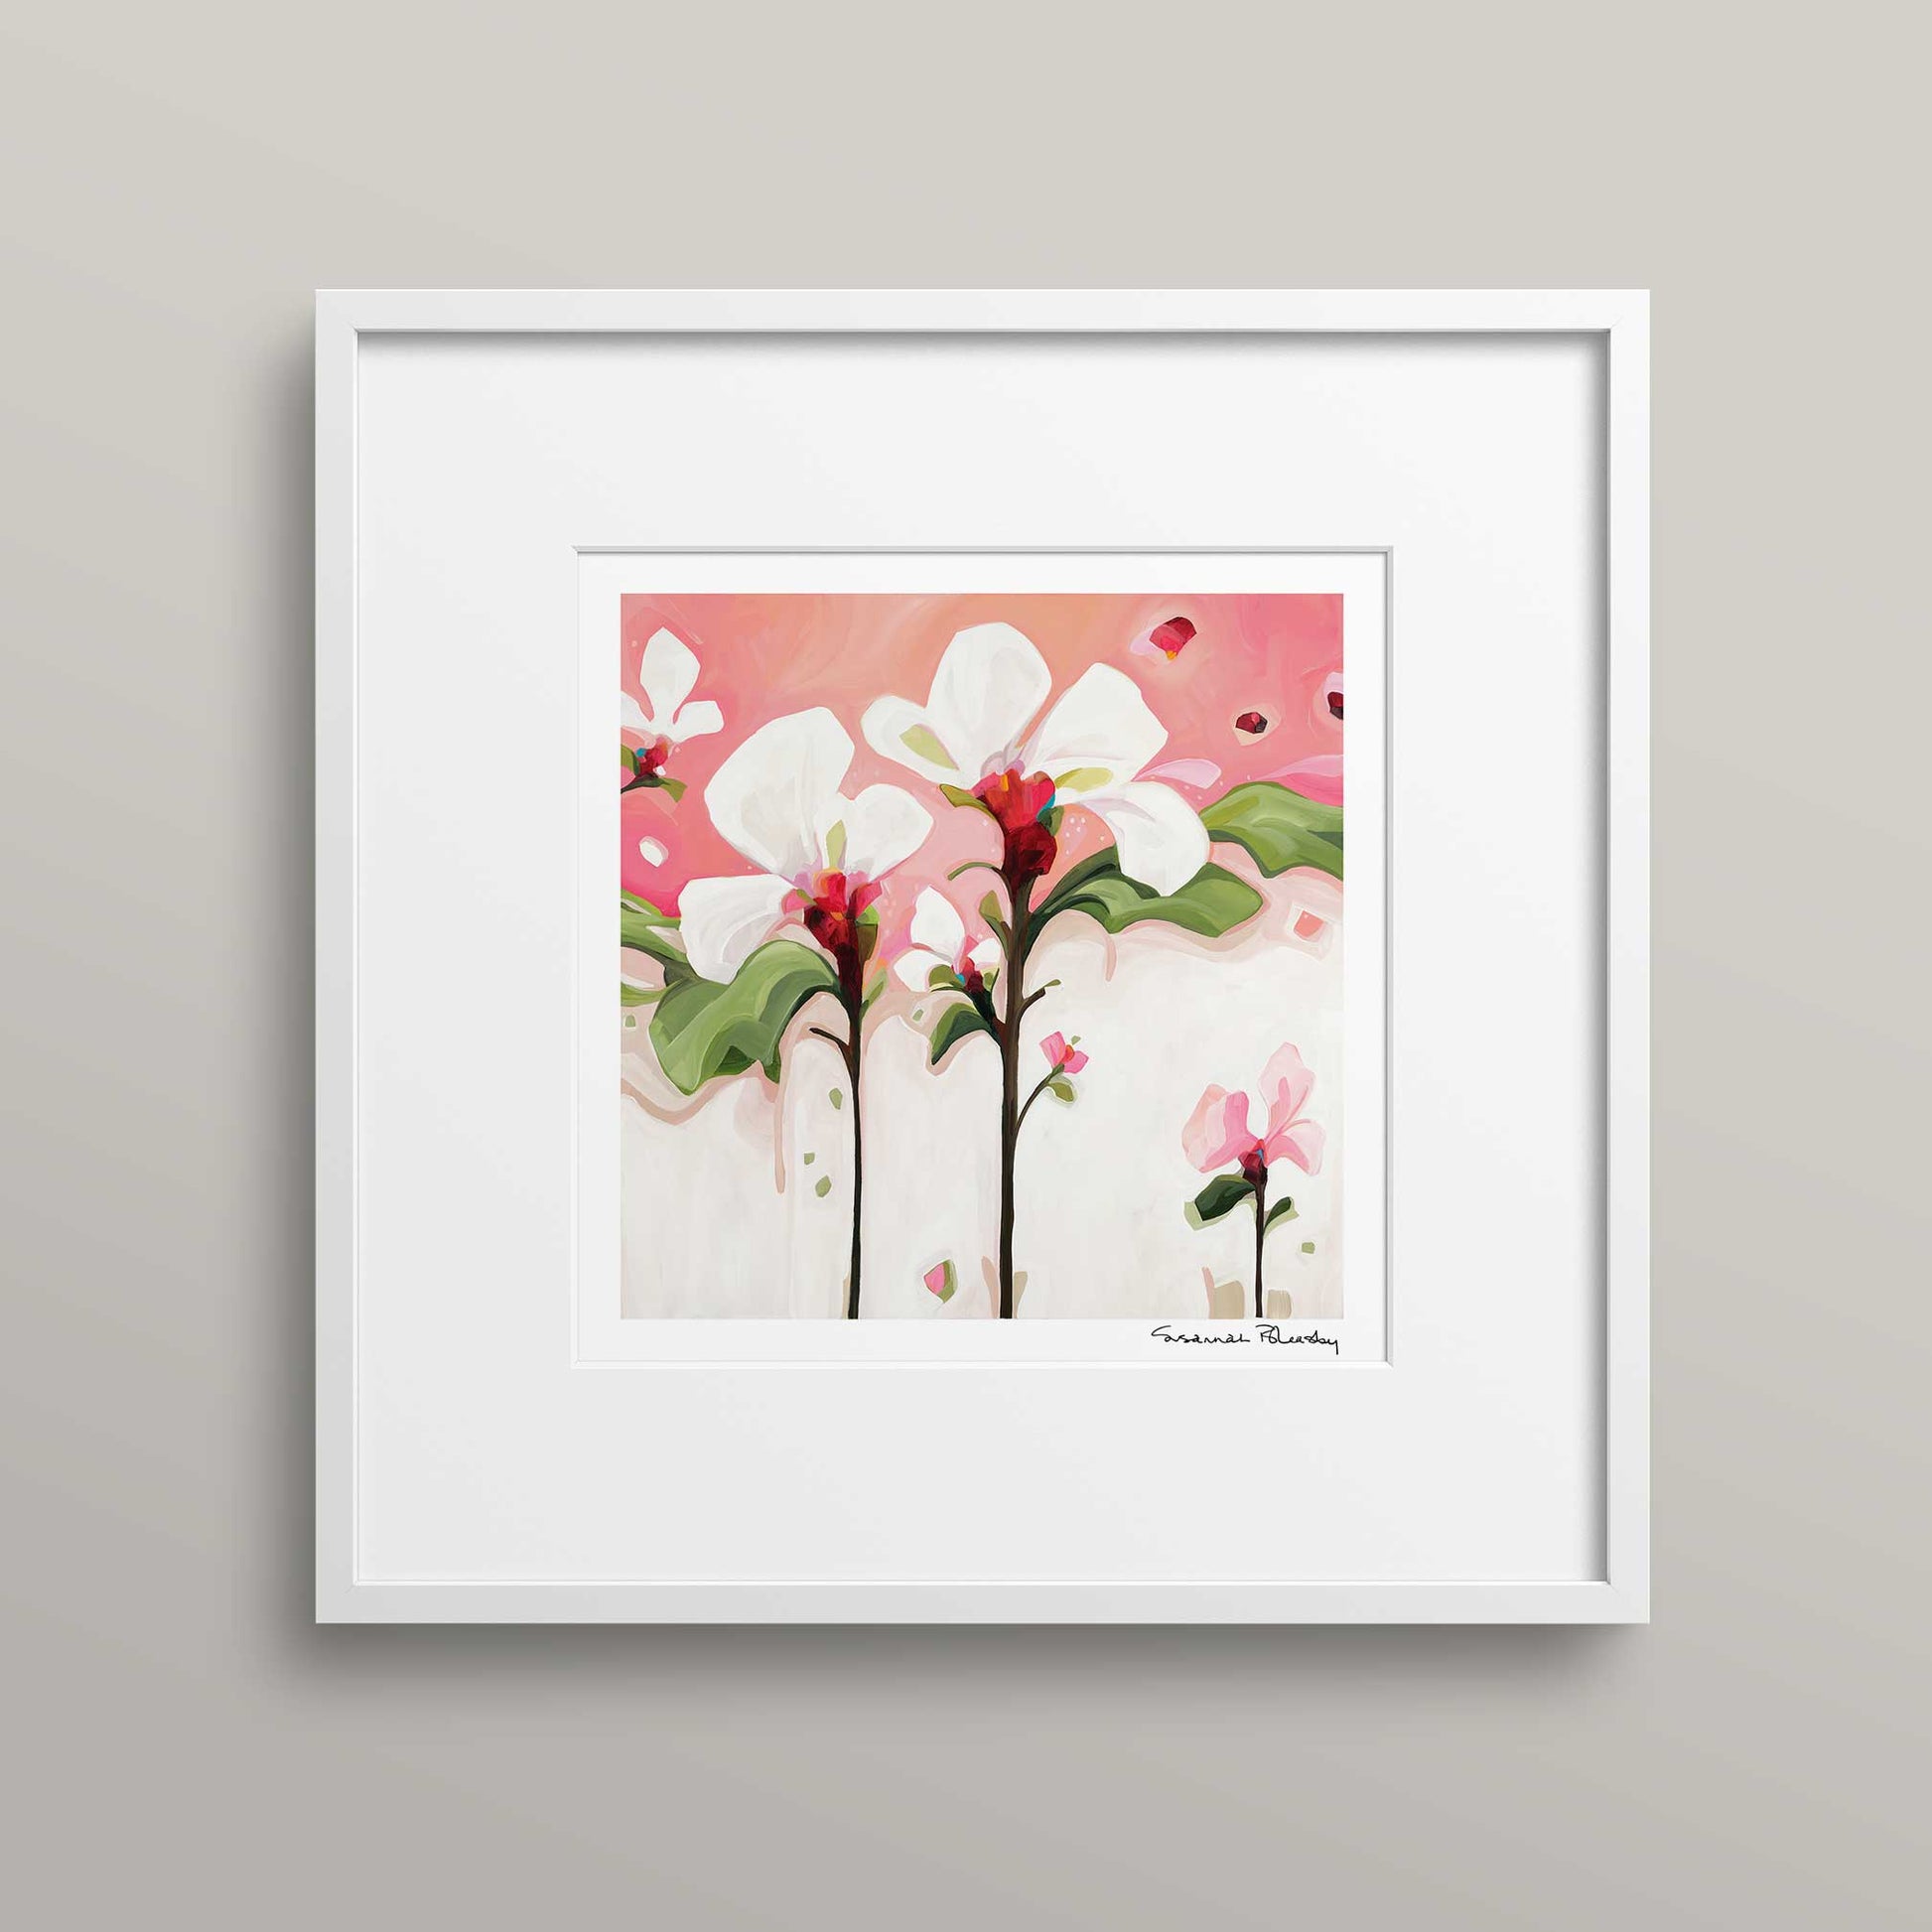 Framed acrylic flower painting print of white flowers on soft pink peach background